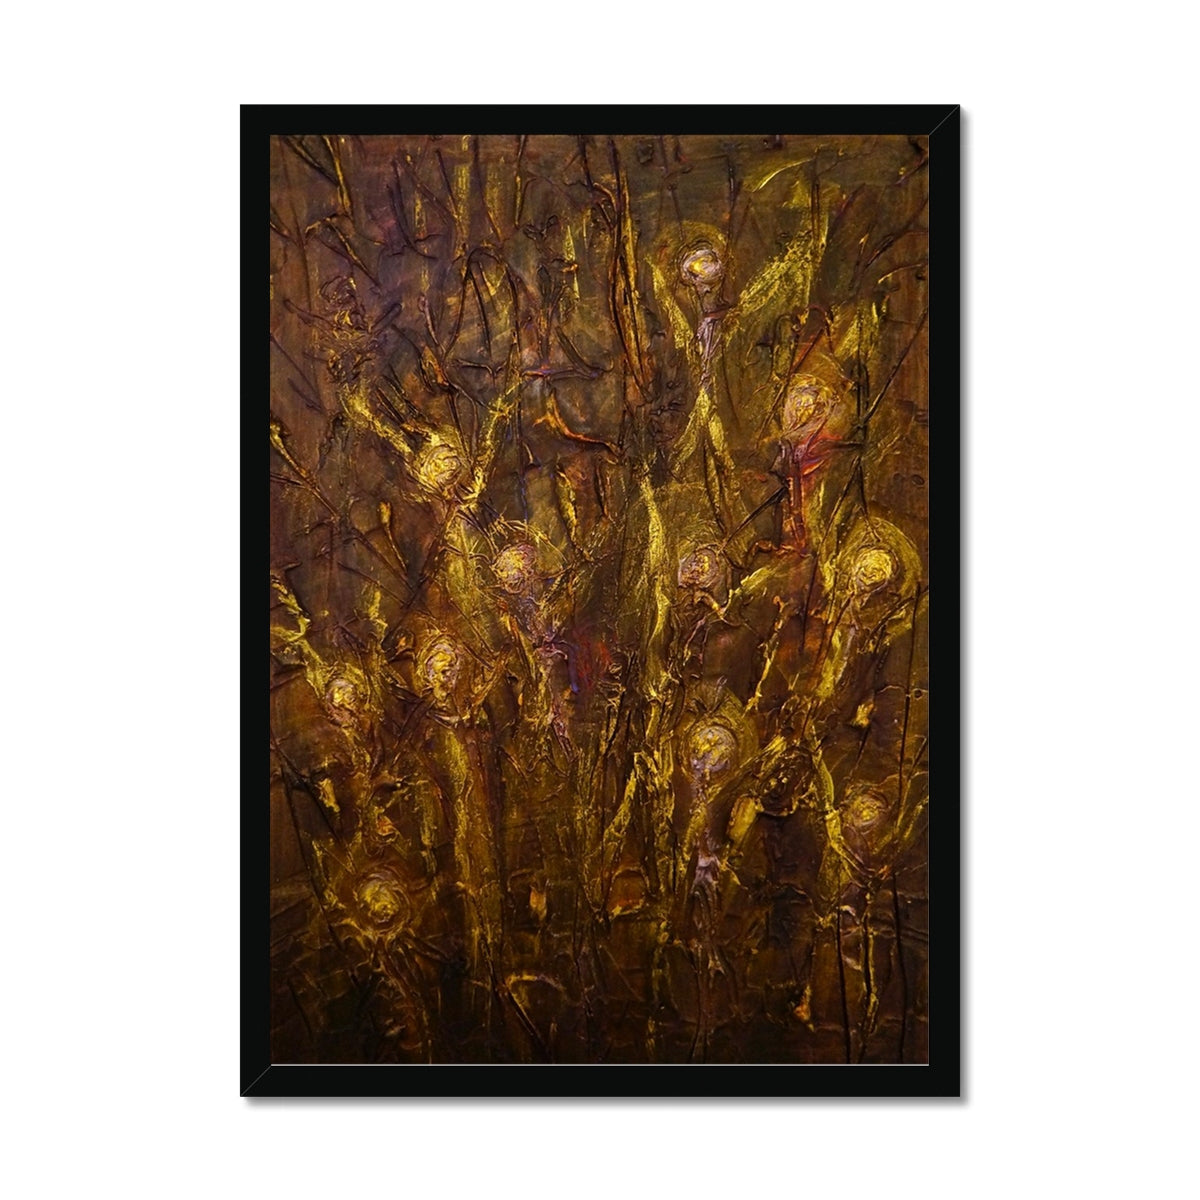 Tam O Shanter Witches Painting | Framed Prints From Scotland-Framed Prints-Abstract & Impressionistic Art Gallery-A2 Portrait-Black Frame-Paintings, Prints, Homeware, Art Gifts From Scotland By Scottish Artist Kevin Hunter